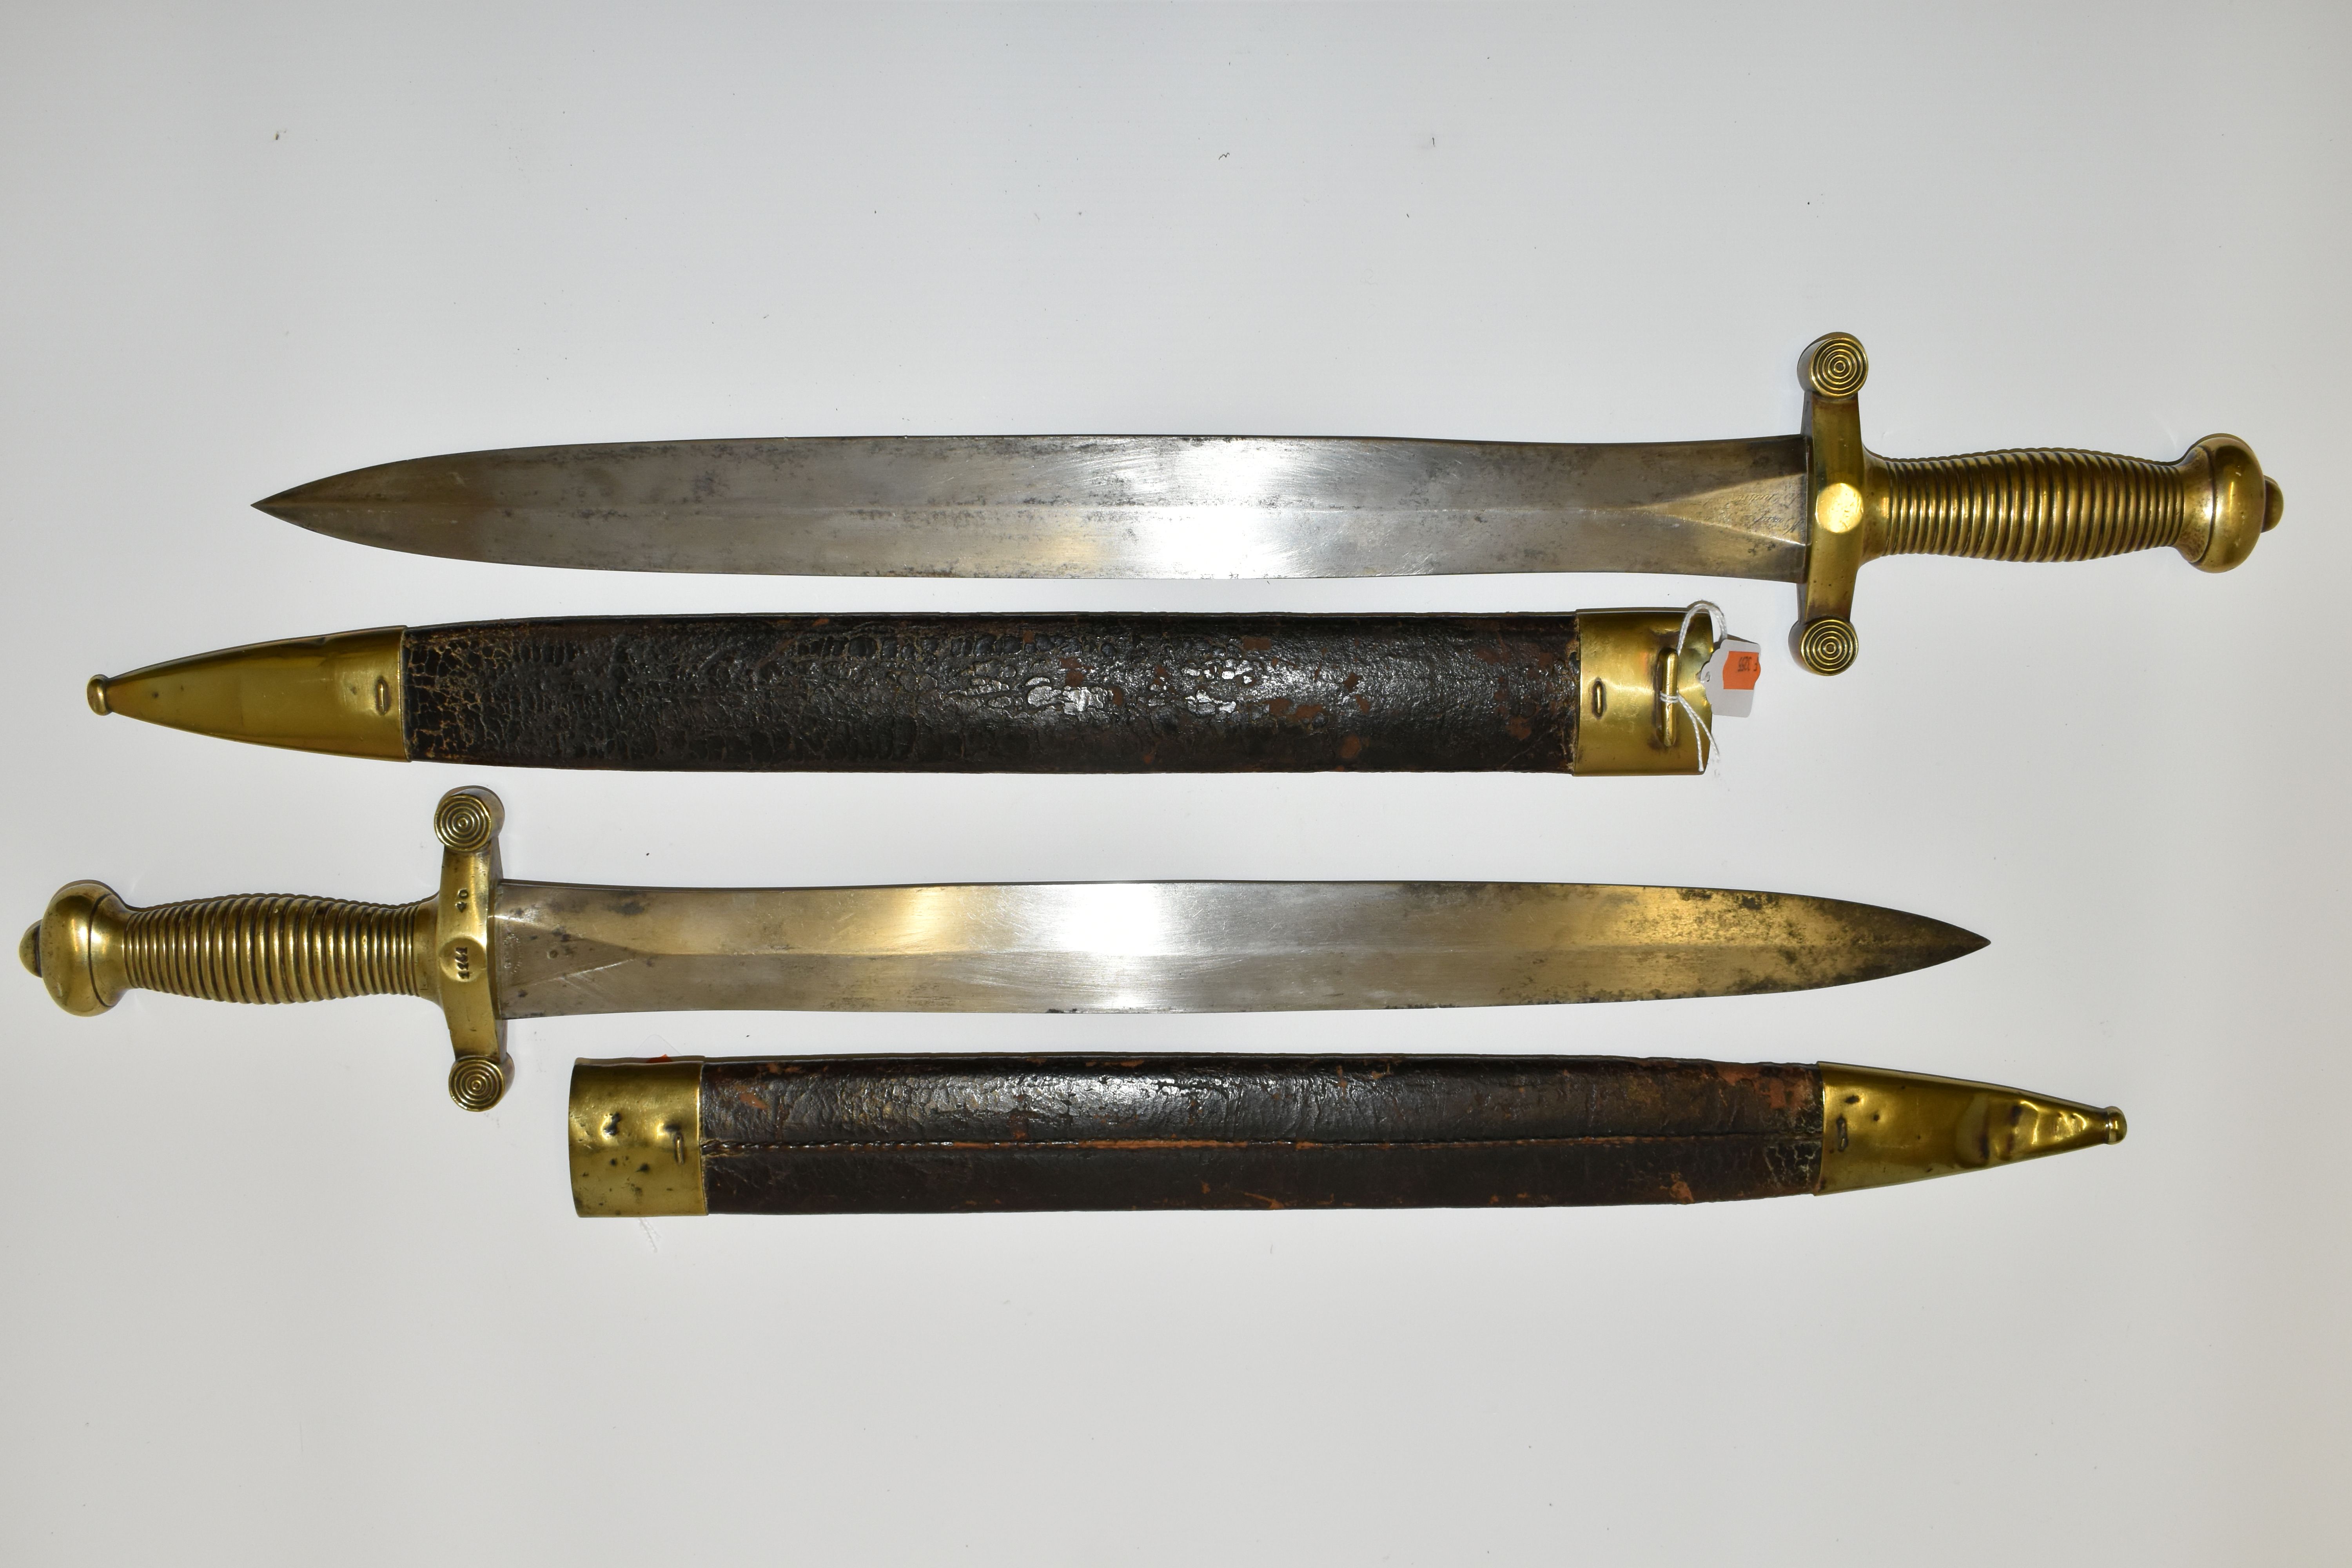 TWO MID 19TH CENTURY FRENCH ARMY CADETS GLADIUS SWORDS, in their original leather covered